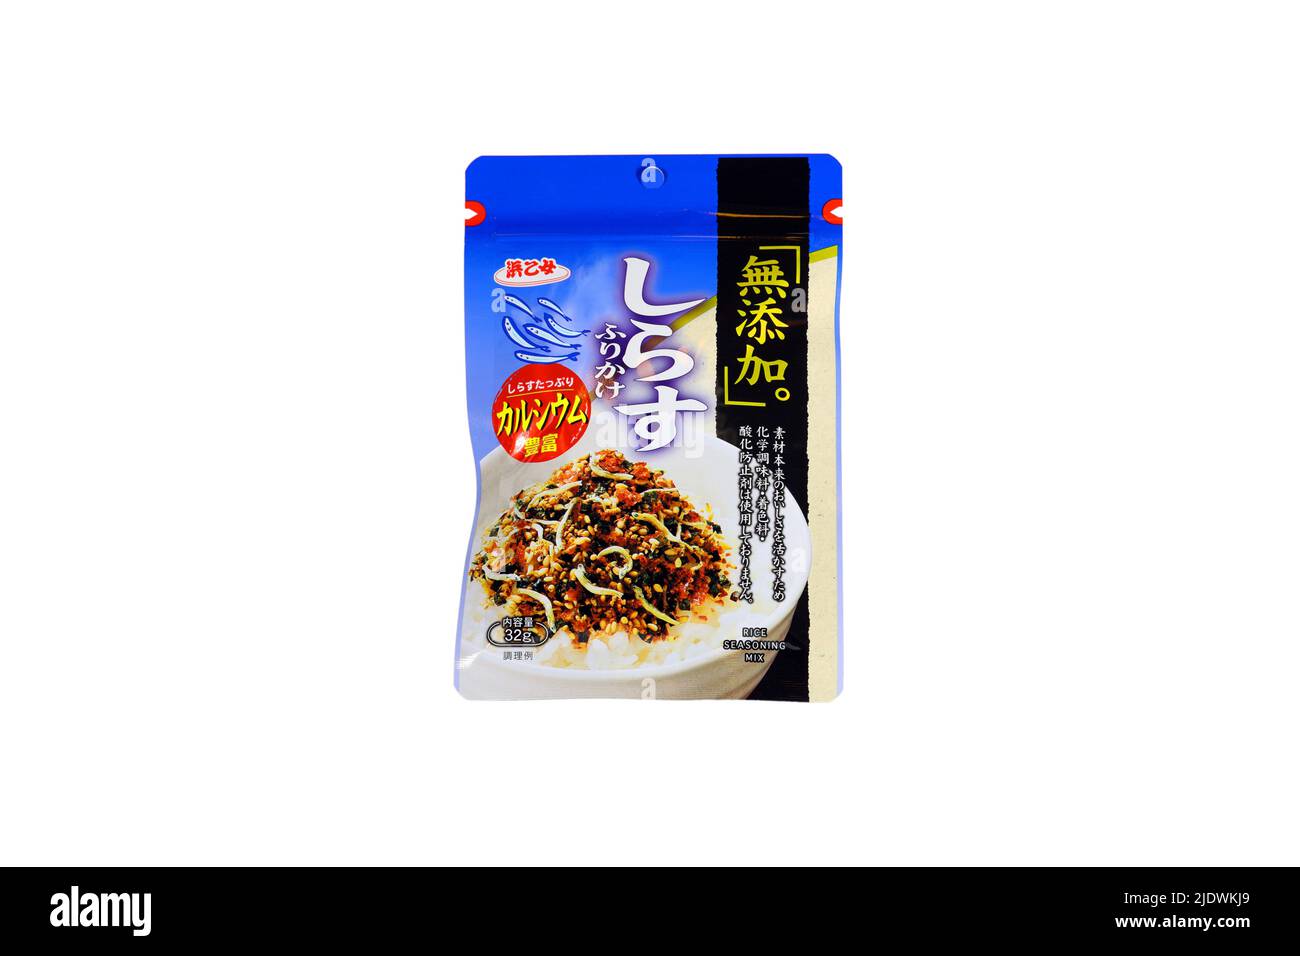 A packet of Hamatome 浜乙女 brand Shirasu Furikake rice seasoning mix isolated on a white background. cutout for illustration and editorial use. Stock Photo